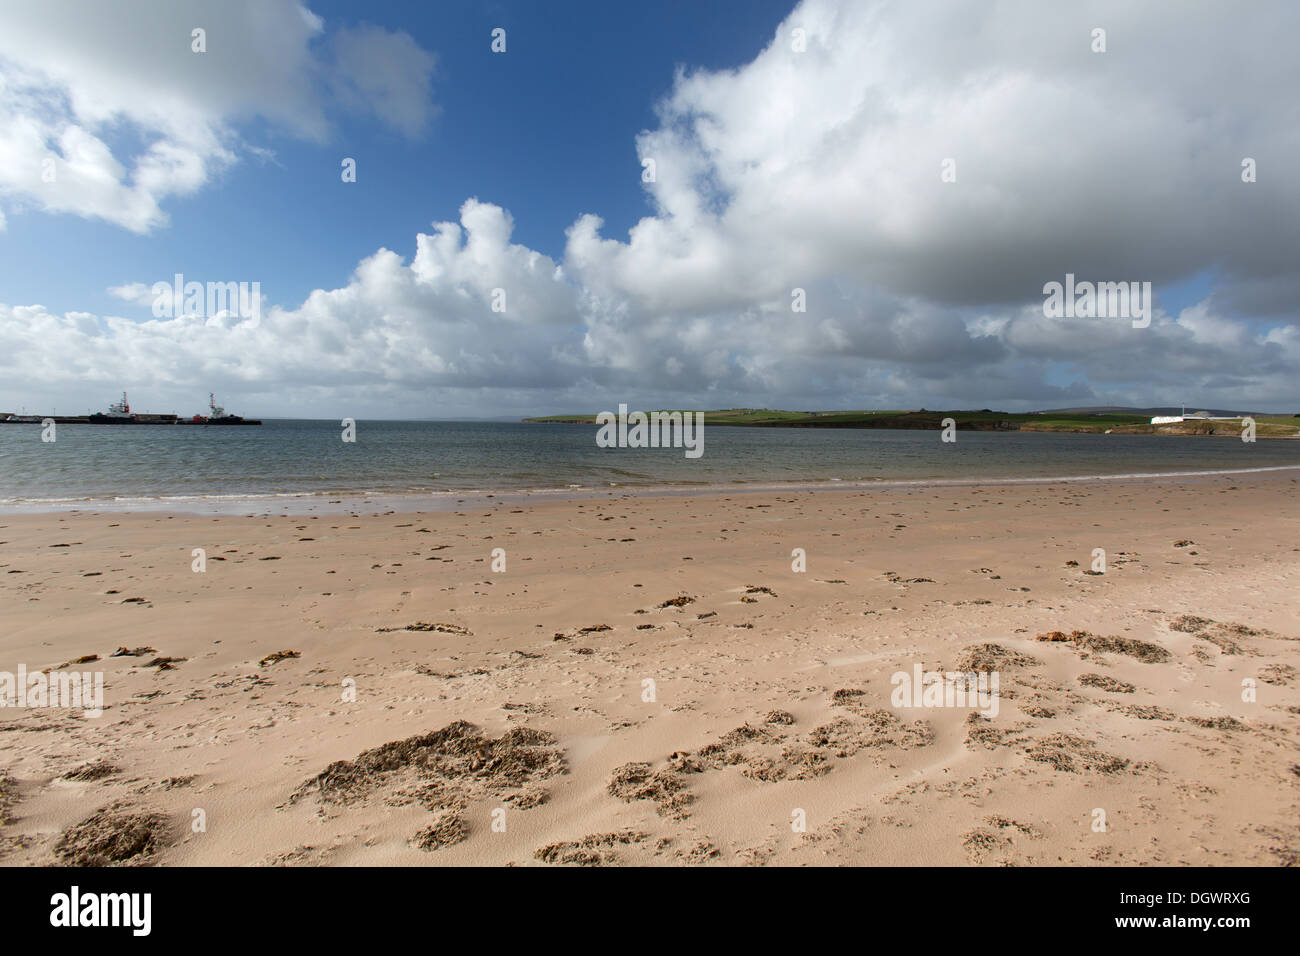 Islands of Orkney, Scotland. Picturesque view of the beach at Scapa Bay with Scapa Flow in the background. Stock Photo